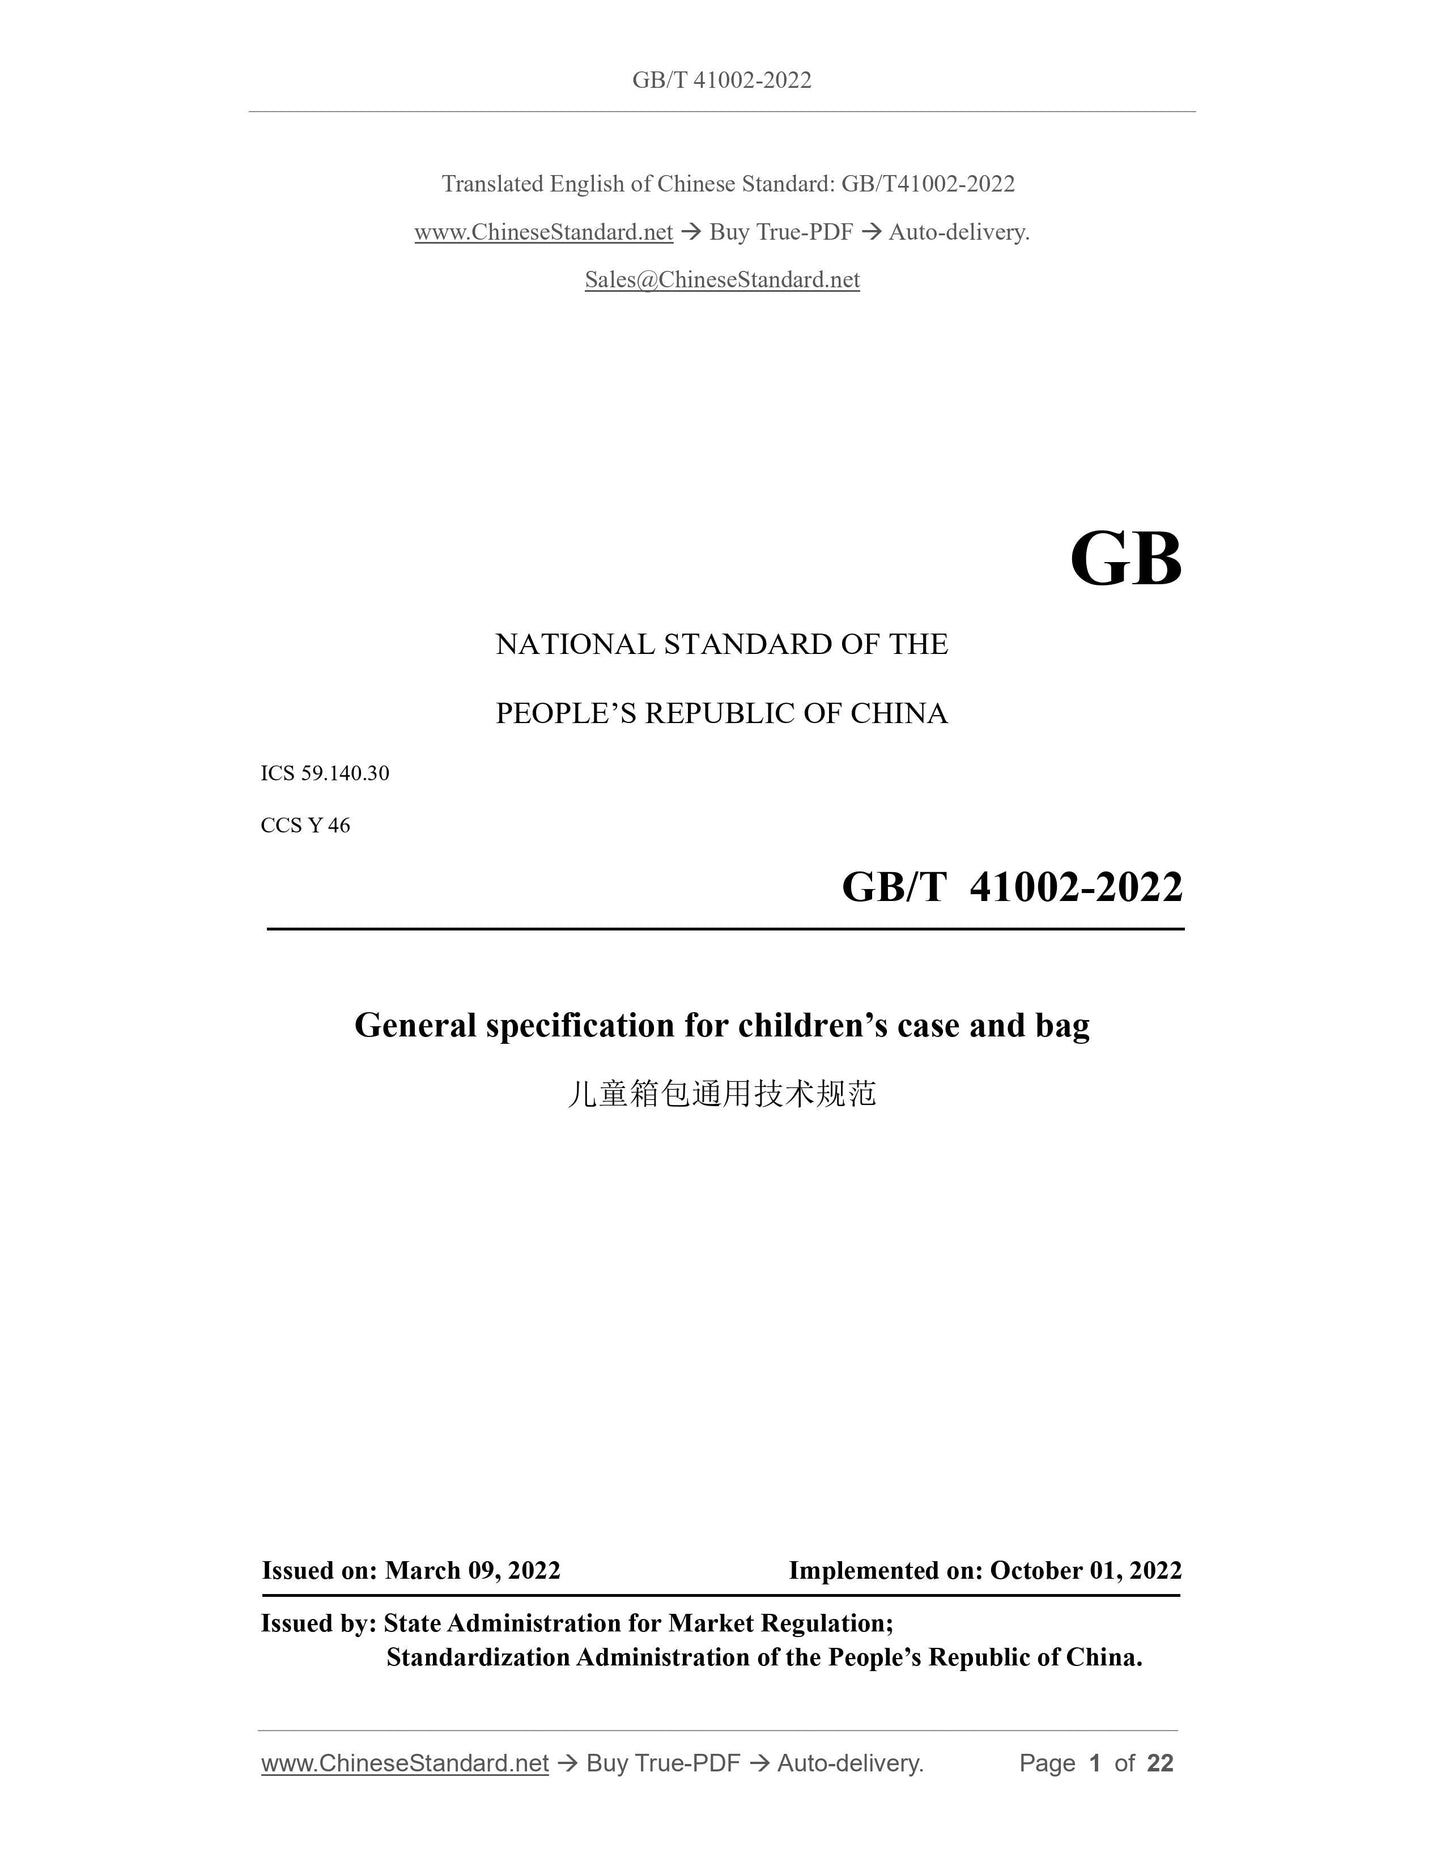 GB/T 41002-2022 Page 1